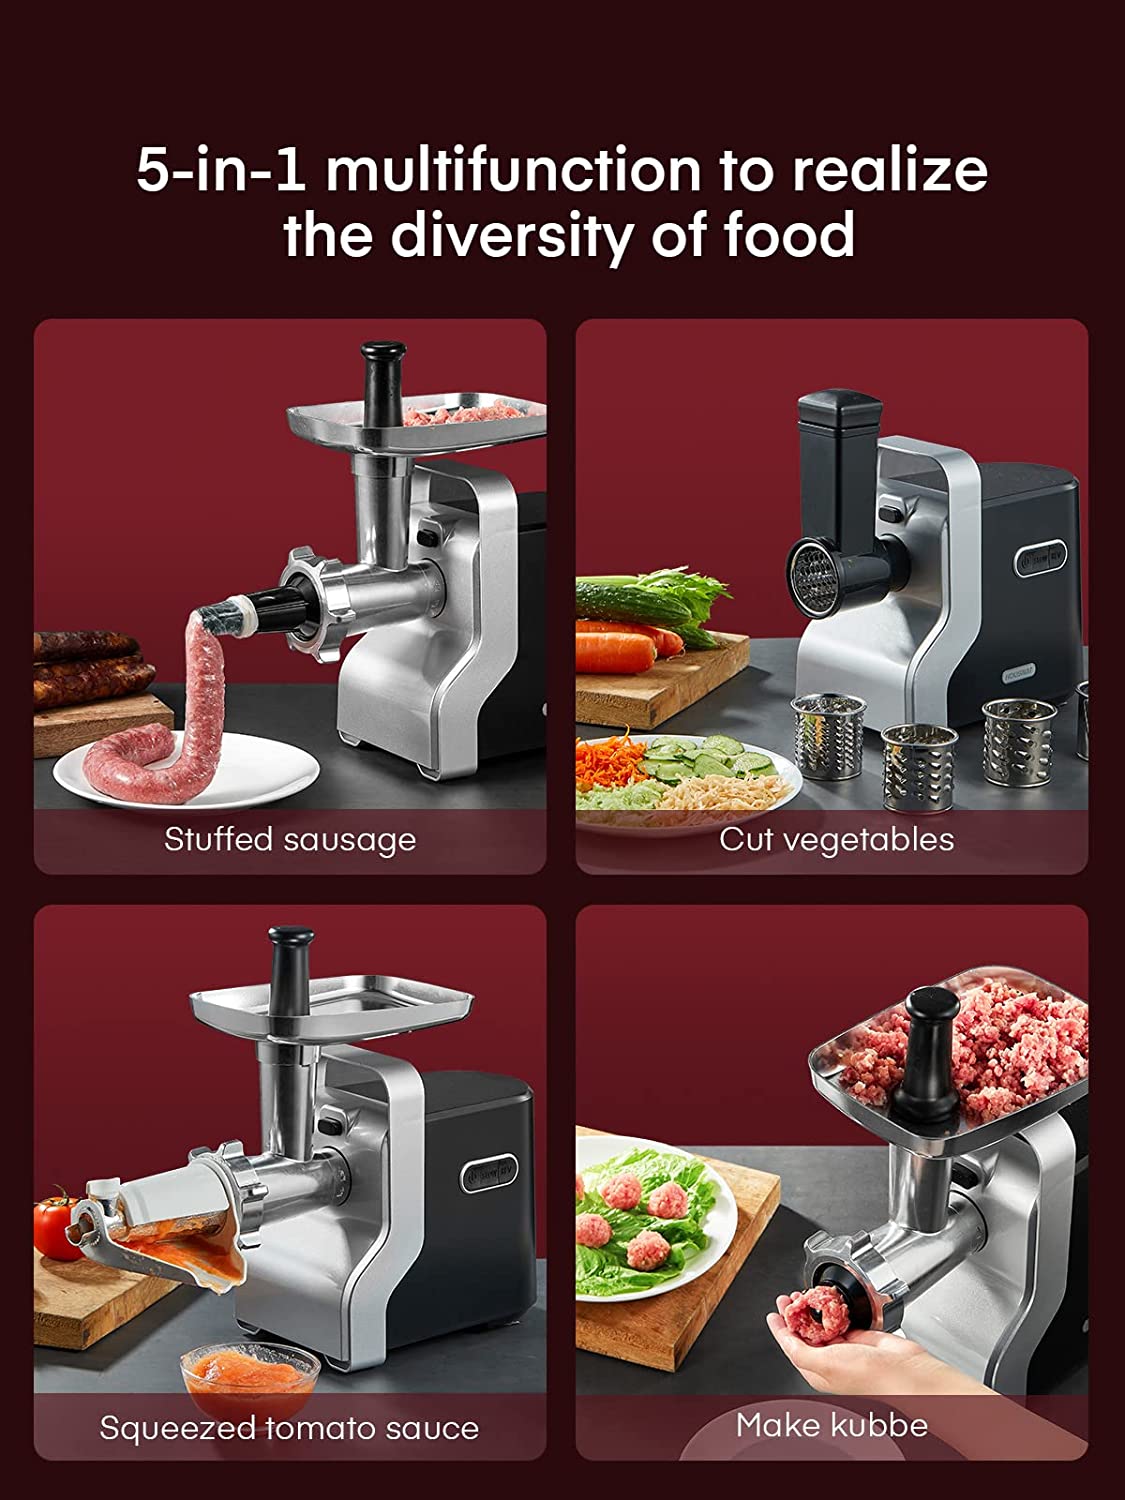 5-in-1 multifunction to releaze the diversity of food, Electric Meat Grinder Heavy Duty - 5 in 1 2500W Max Powerful Home Food Grinder - Sausage Stuffer - Slicer/Shredder/Grater - Kubbe & Tomato Juicing Kits - 3 Stainless Steel Grinding Plates - Size #12